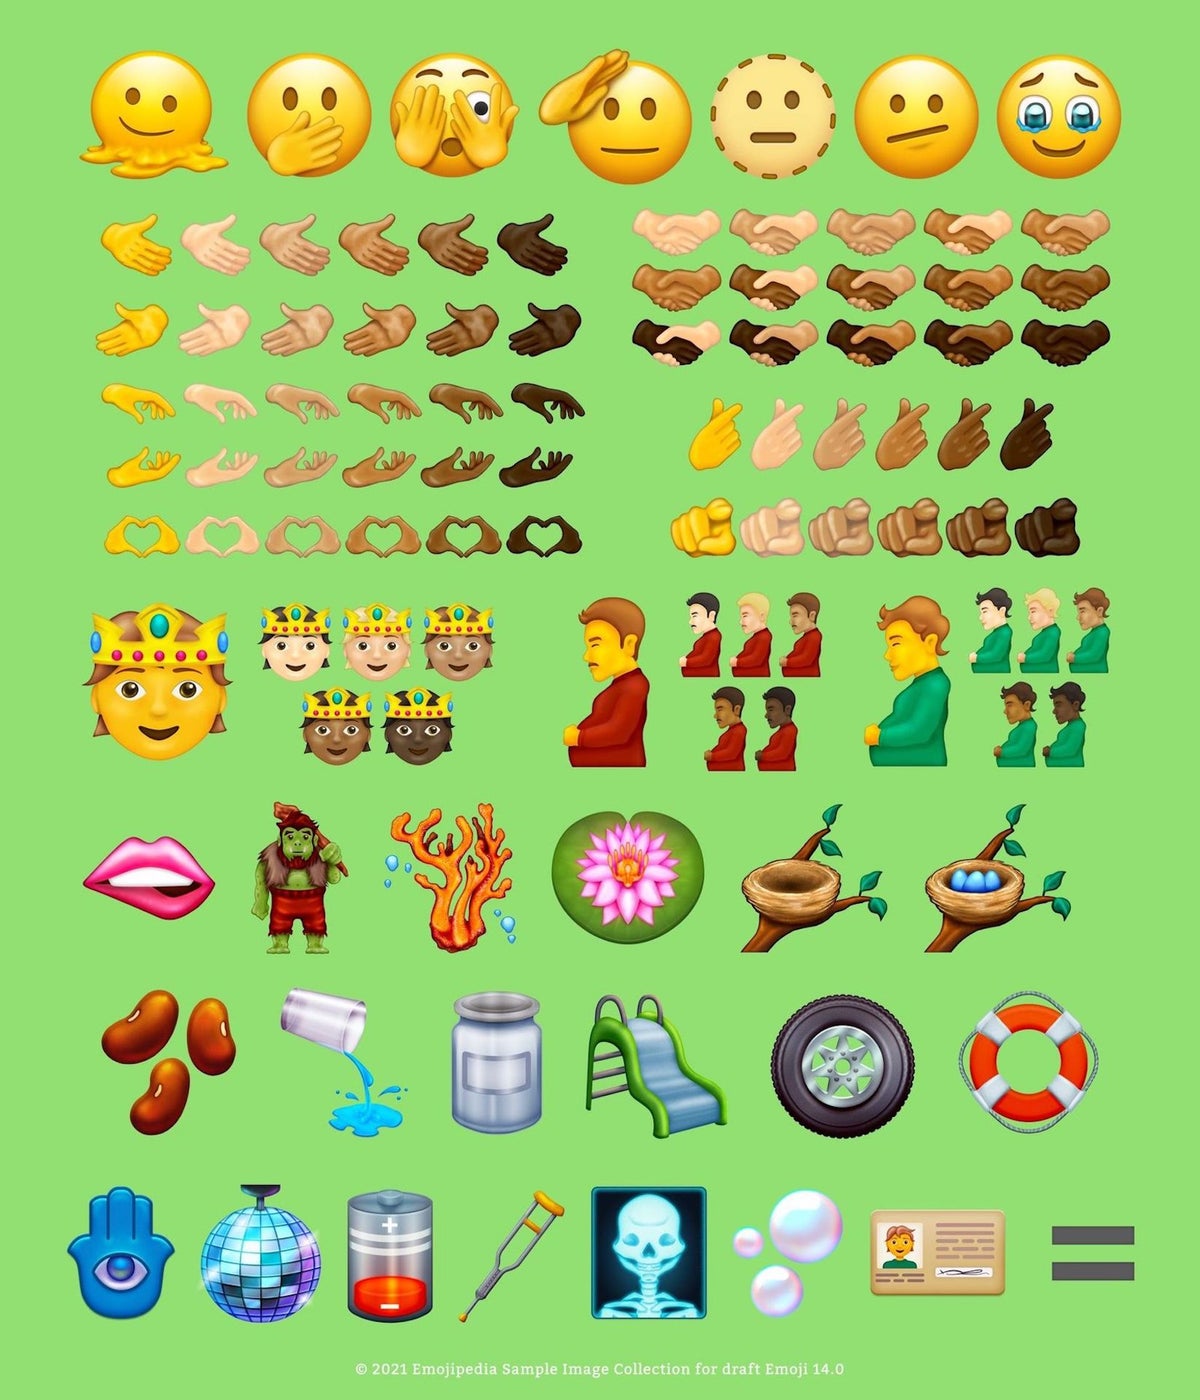 Emojipedia releases new draft set of icons up for approval in September